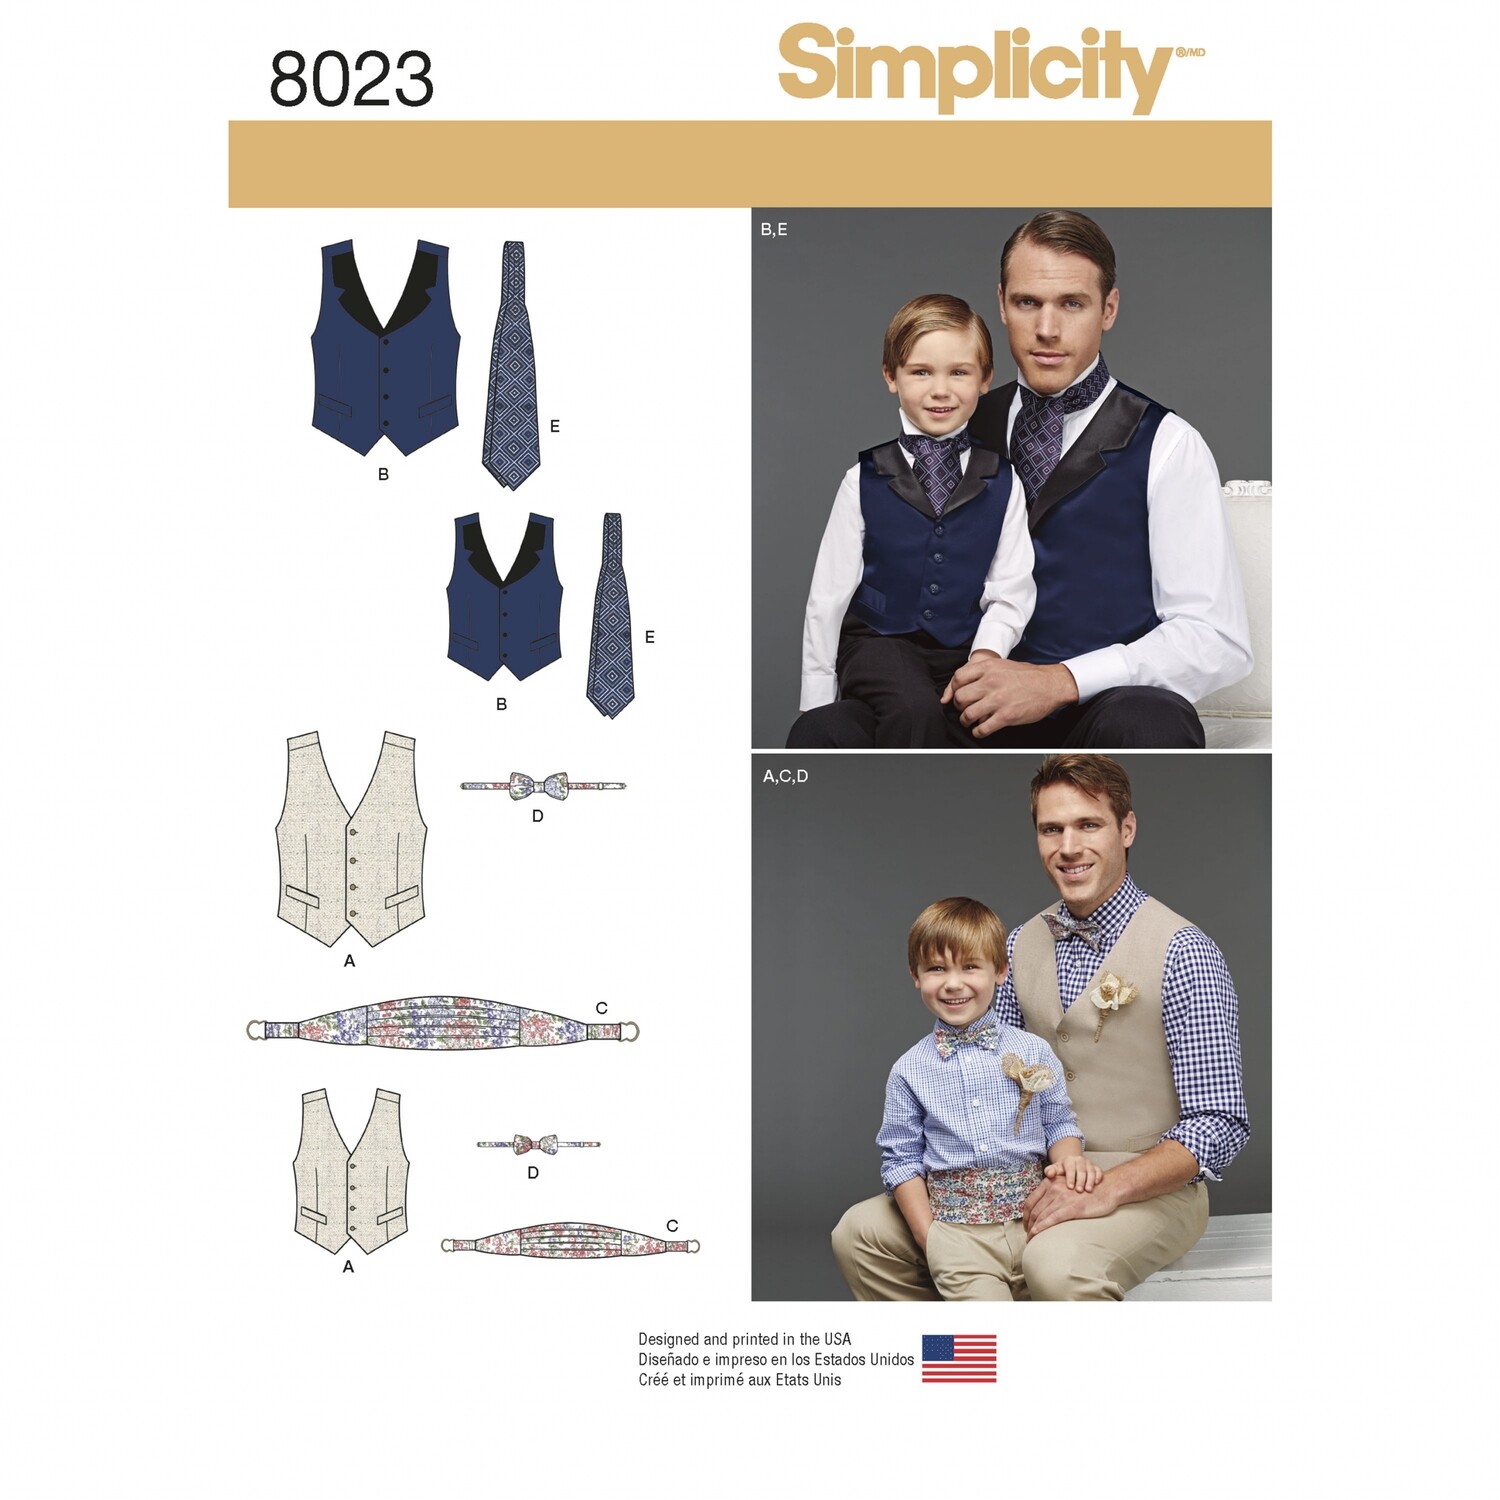 Simplicity Sewing Pattern 8023